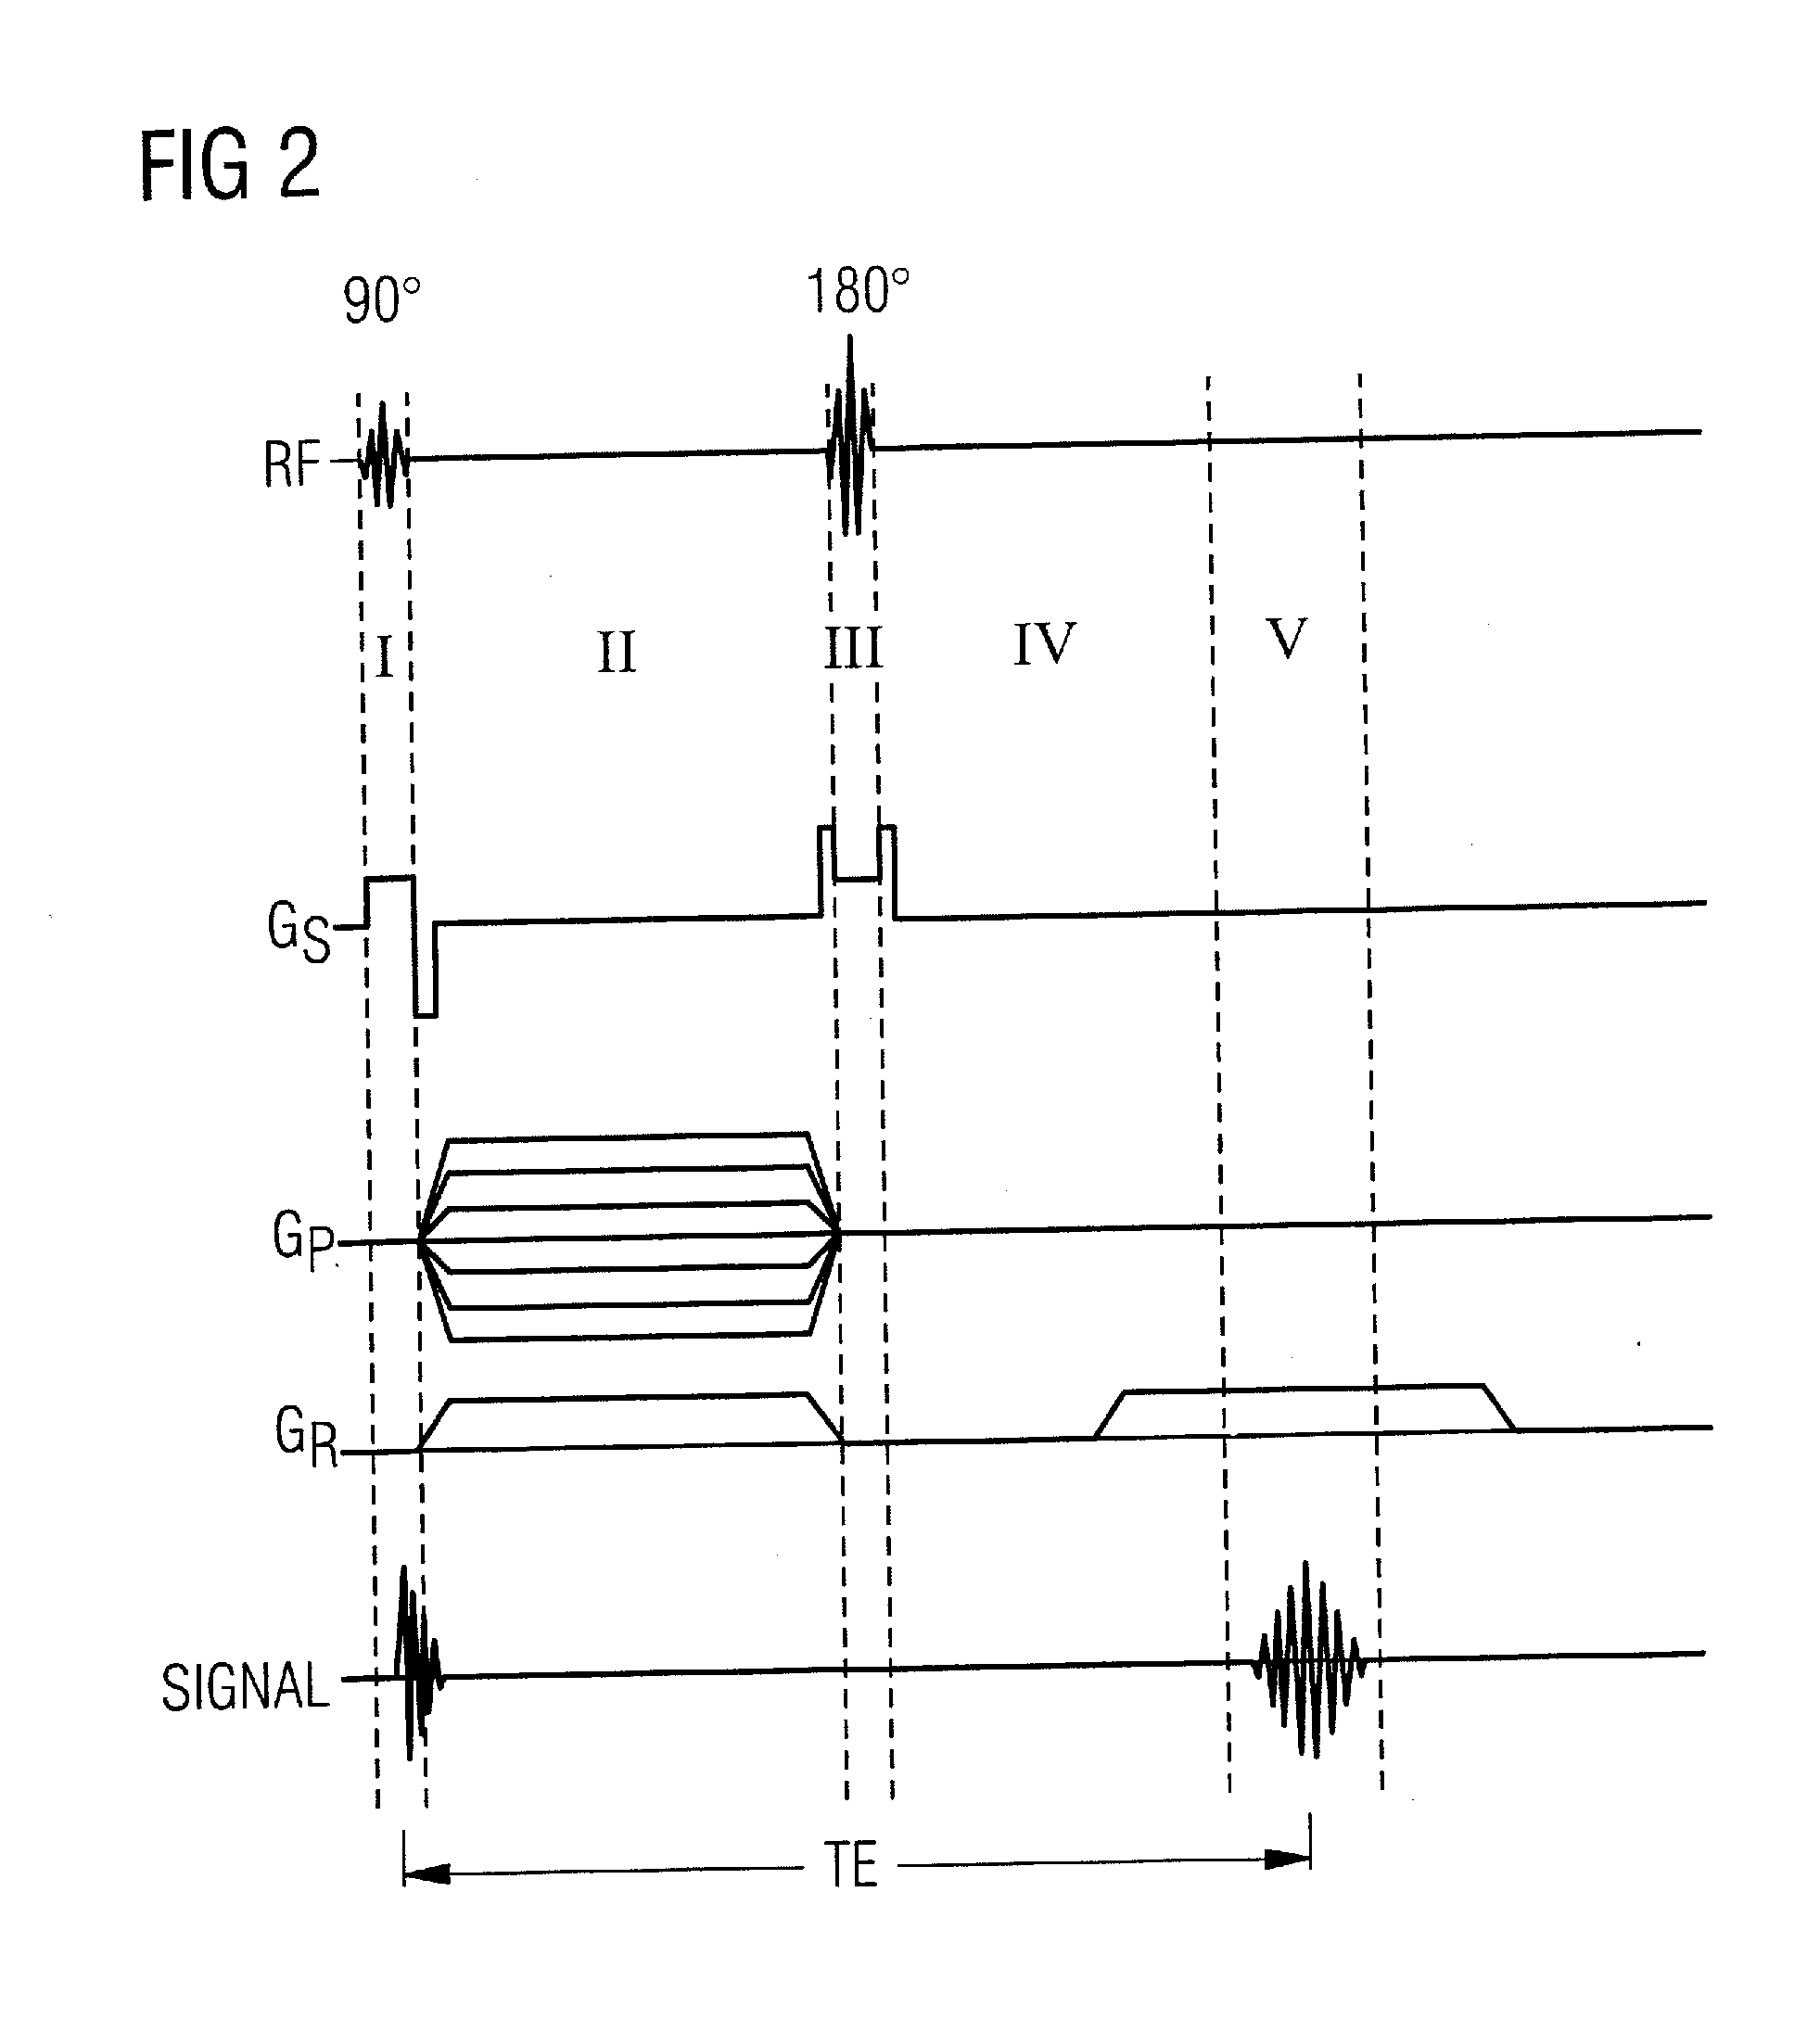 Method and device for automated generation of a formal description of a magnetic resonance system measurement sequence, using a sequence model